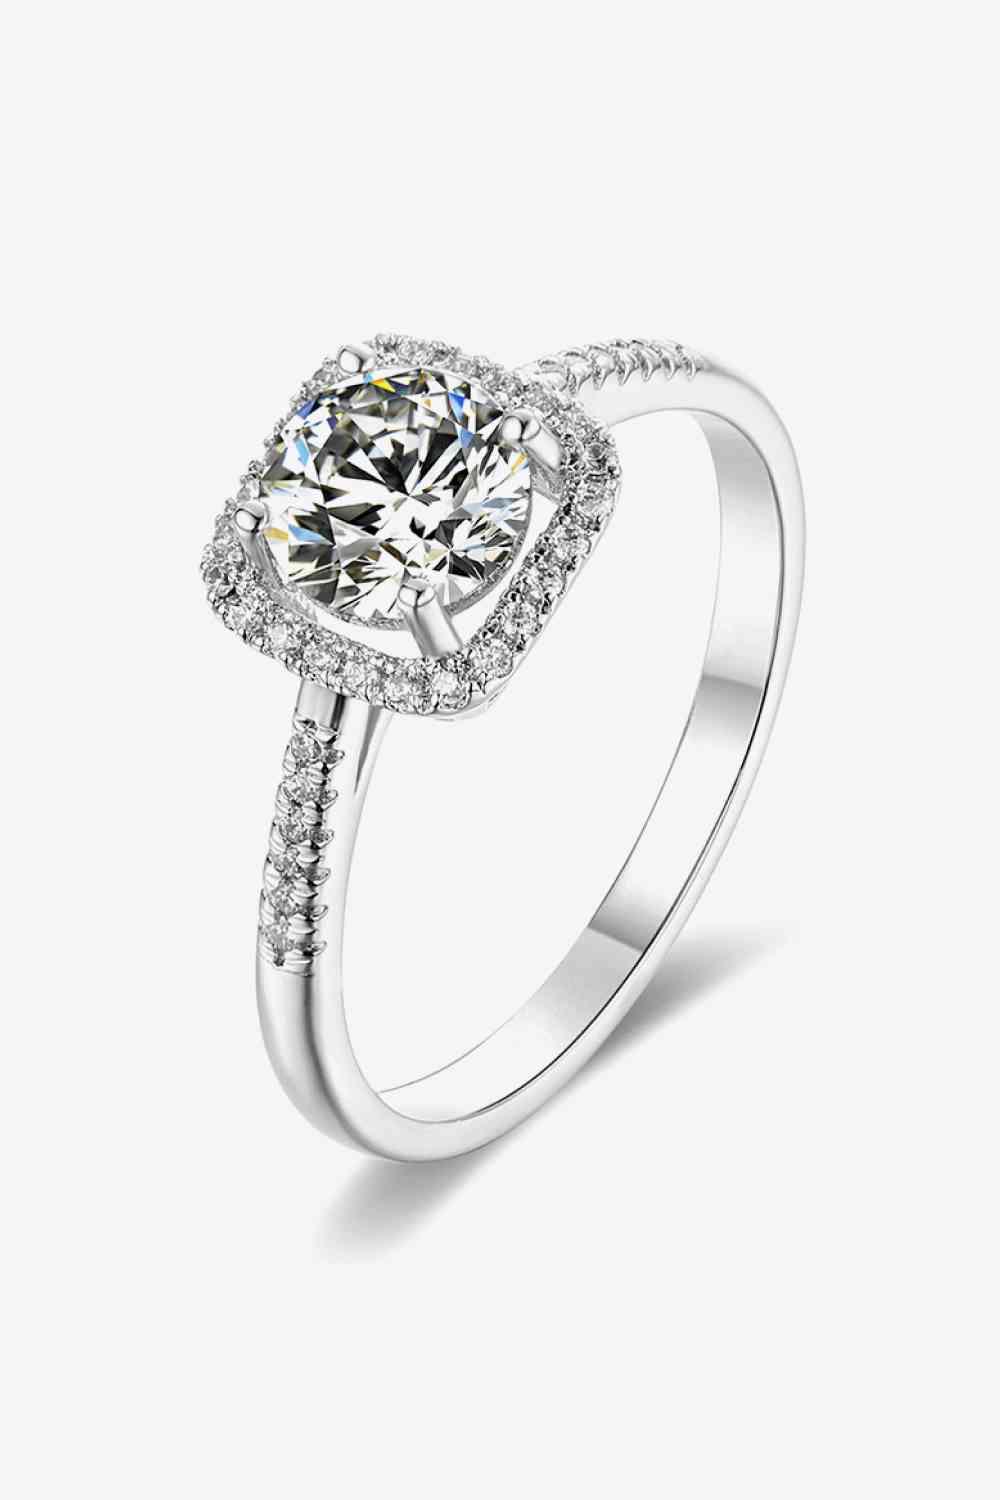 Daring Brilliance 1 Carat Moissanite Zircon Sterling Silver Ring - God's Girl Gifts And Apparel